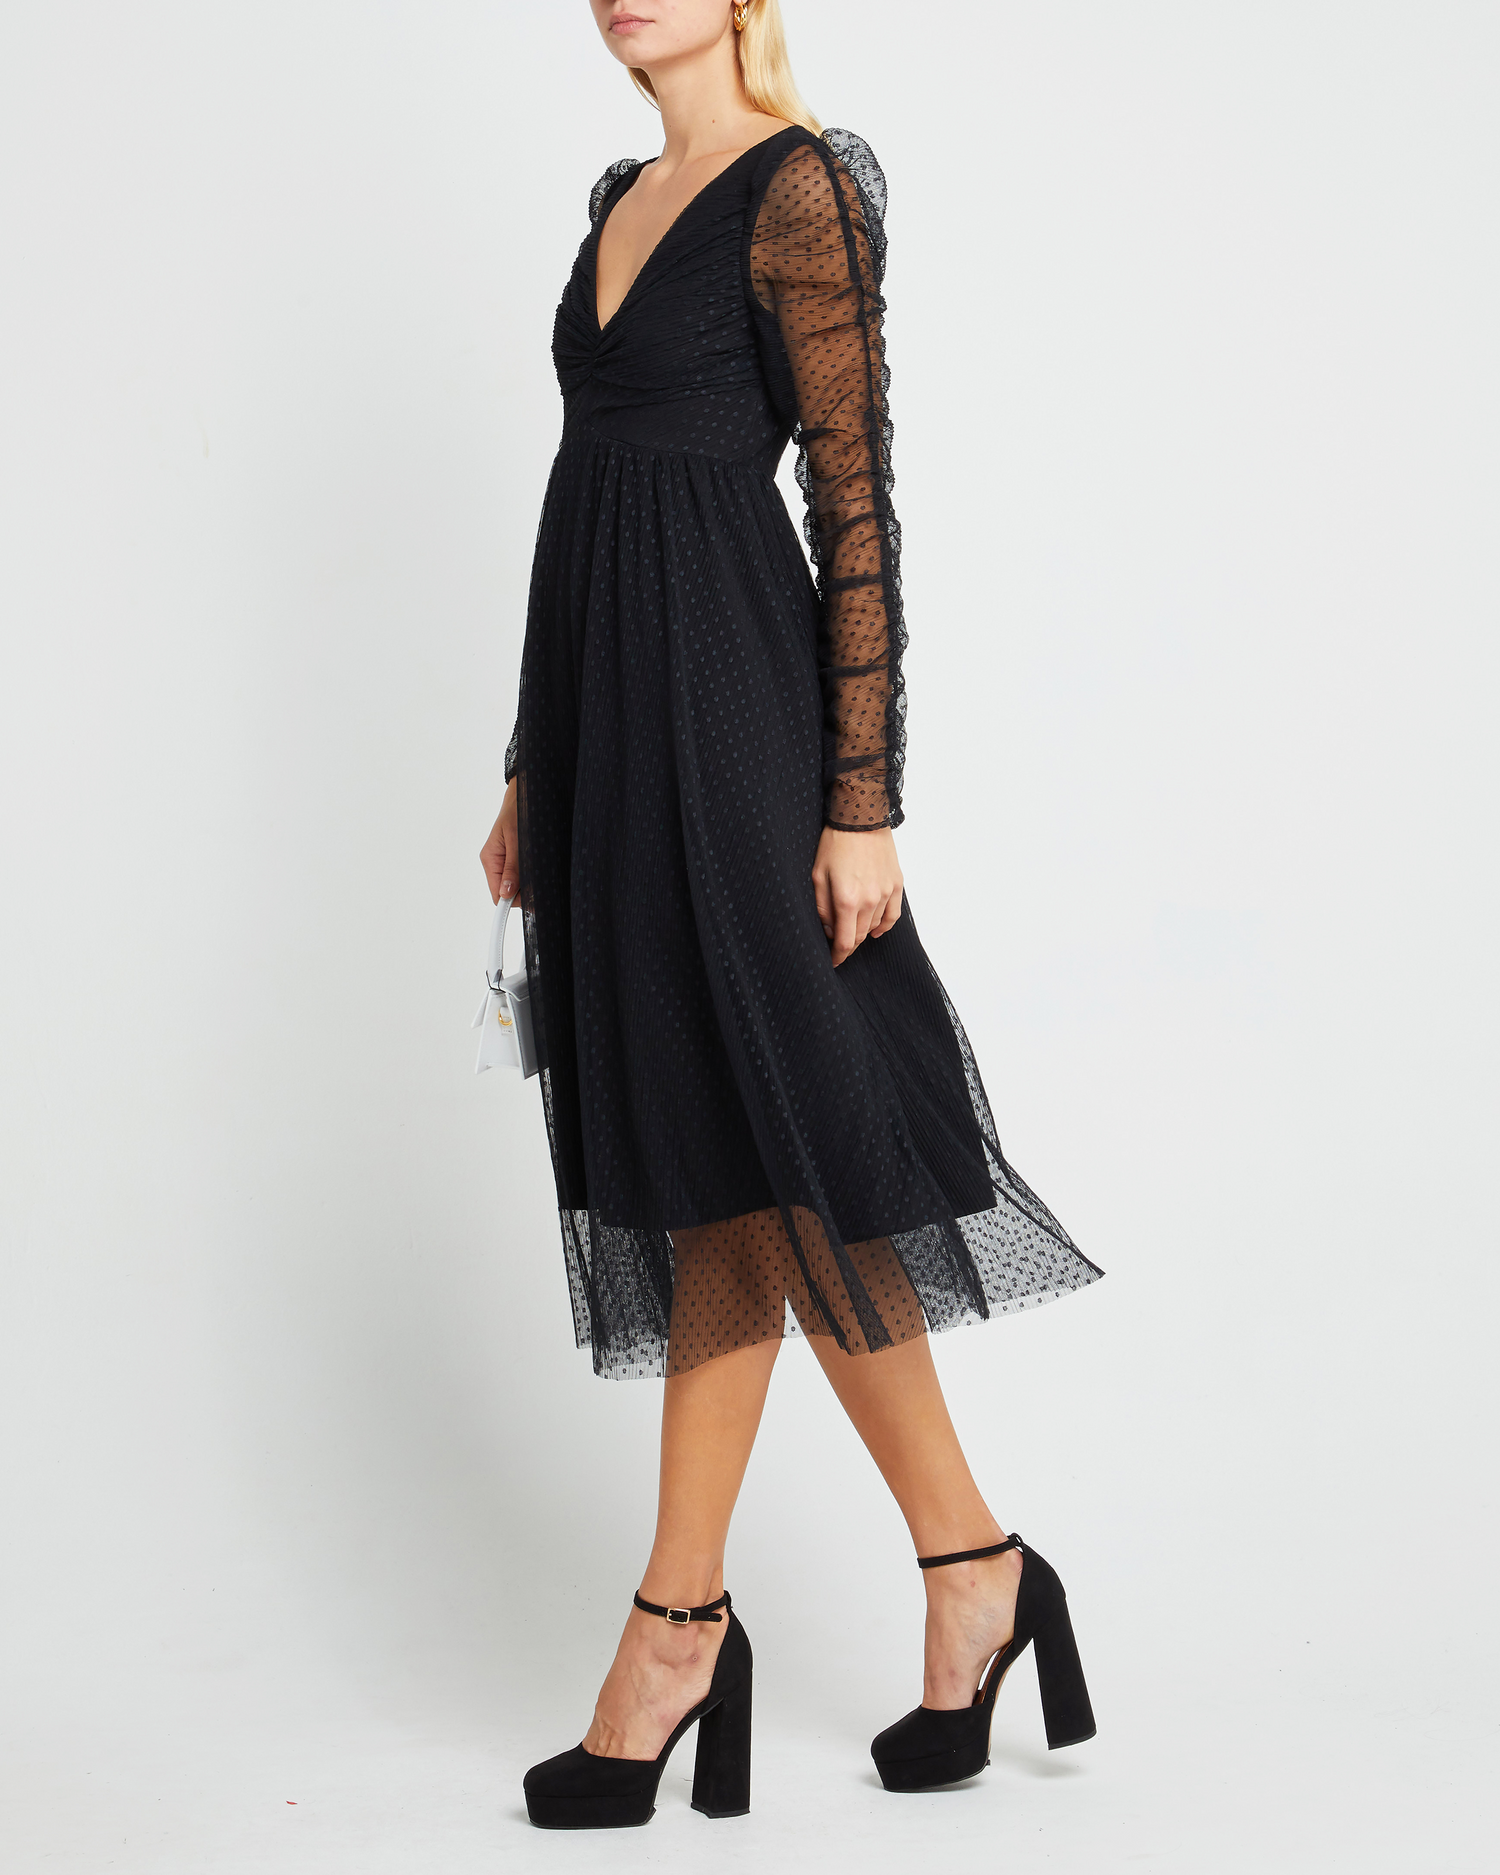 Third image of Daisy Dress, a black wedding guest dress with sheer long sleeves, v-neckline, ruched gathered bust detail, cinched waist, lining, dotted mesh fabric, and back zipper